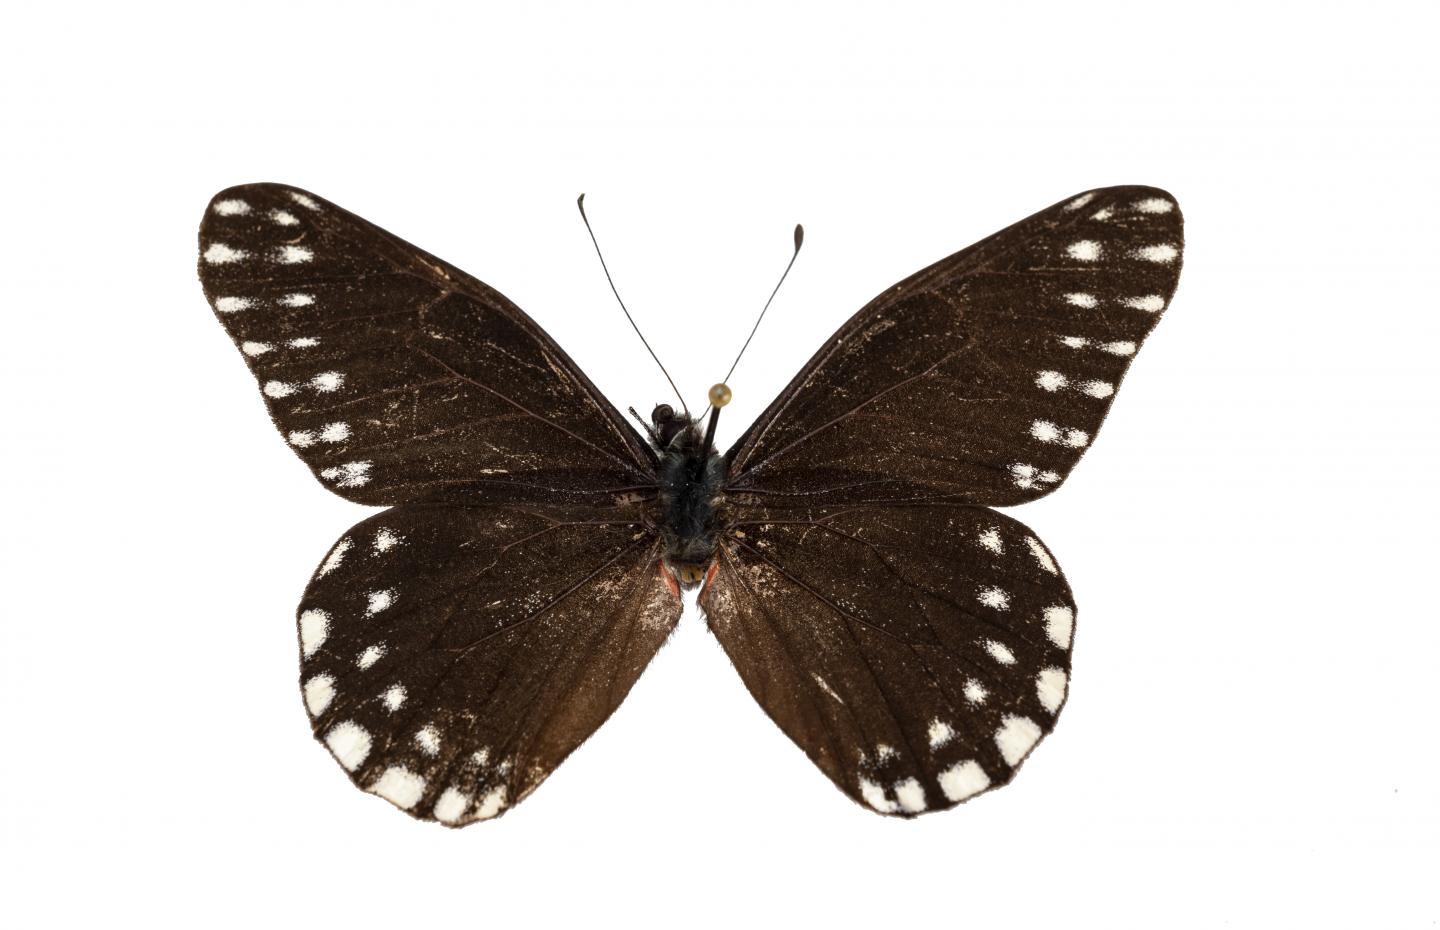 Rare Black Butterfly Named for Early Female Entomologist